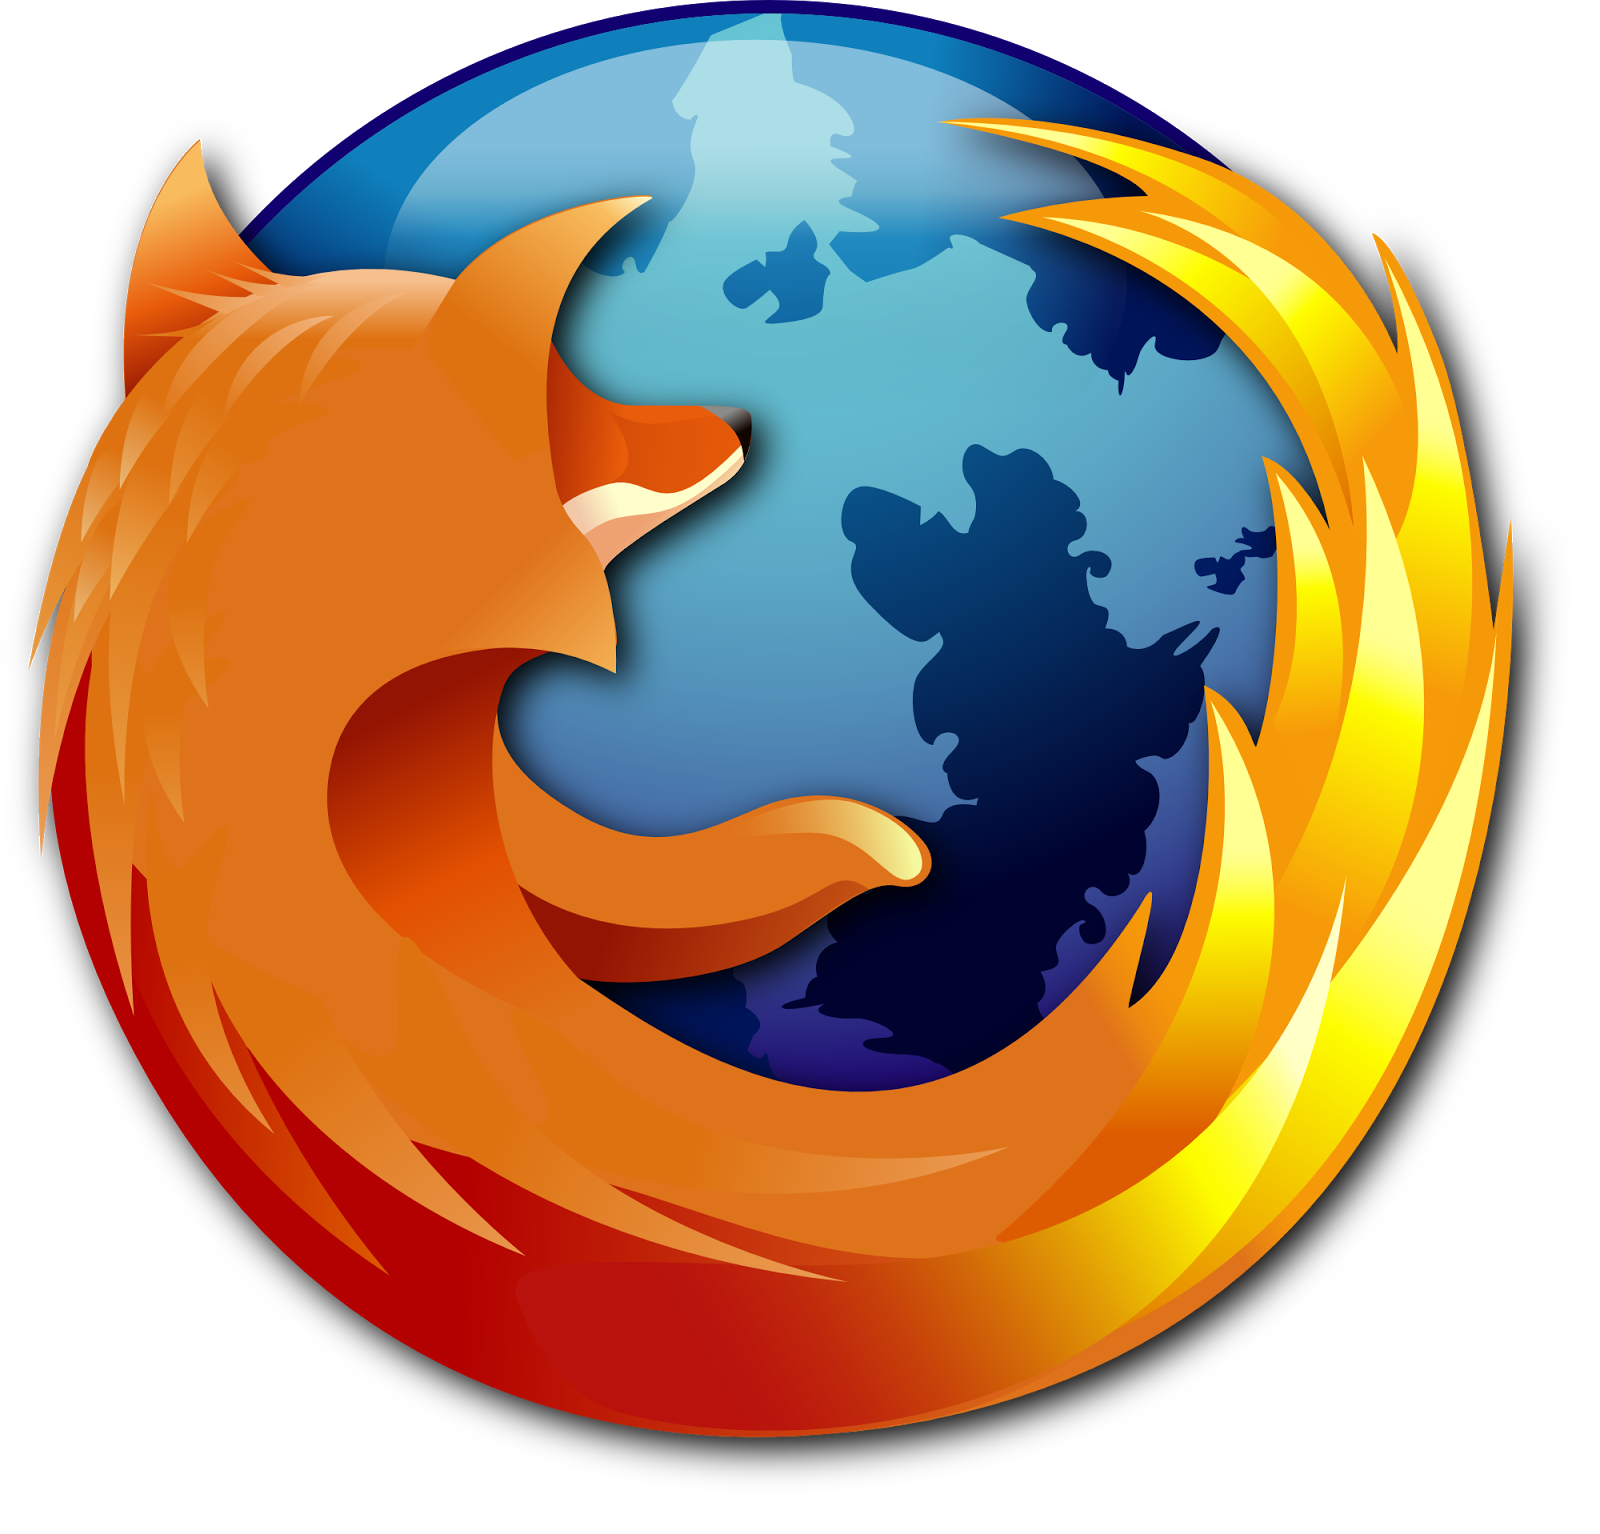 Mozilla Firefox 3.5 0 Free Download For Window 7